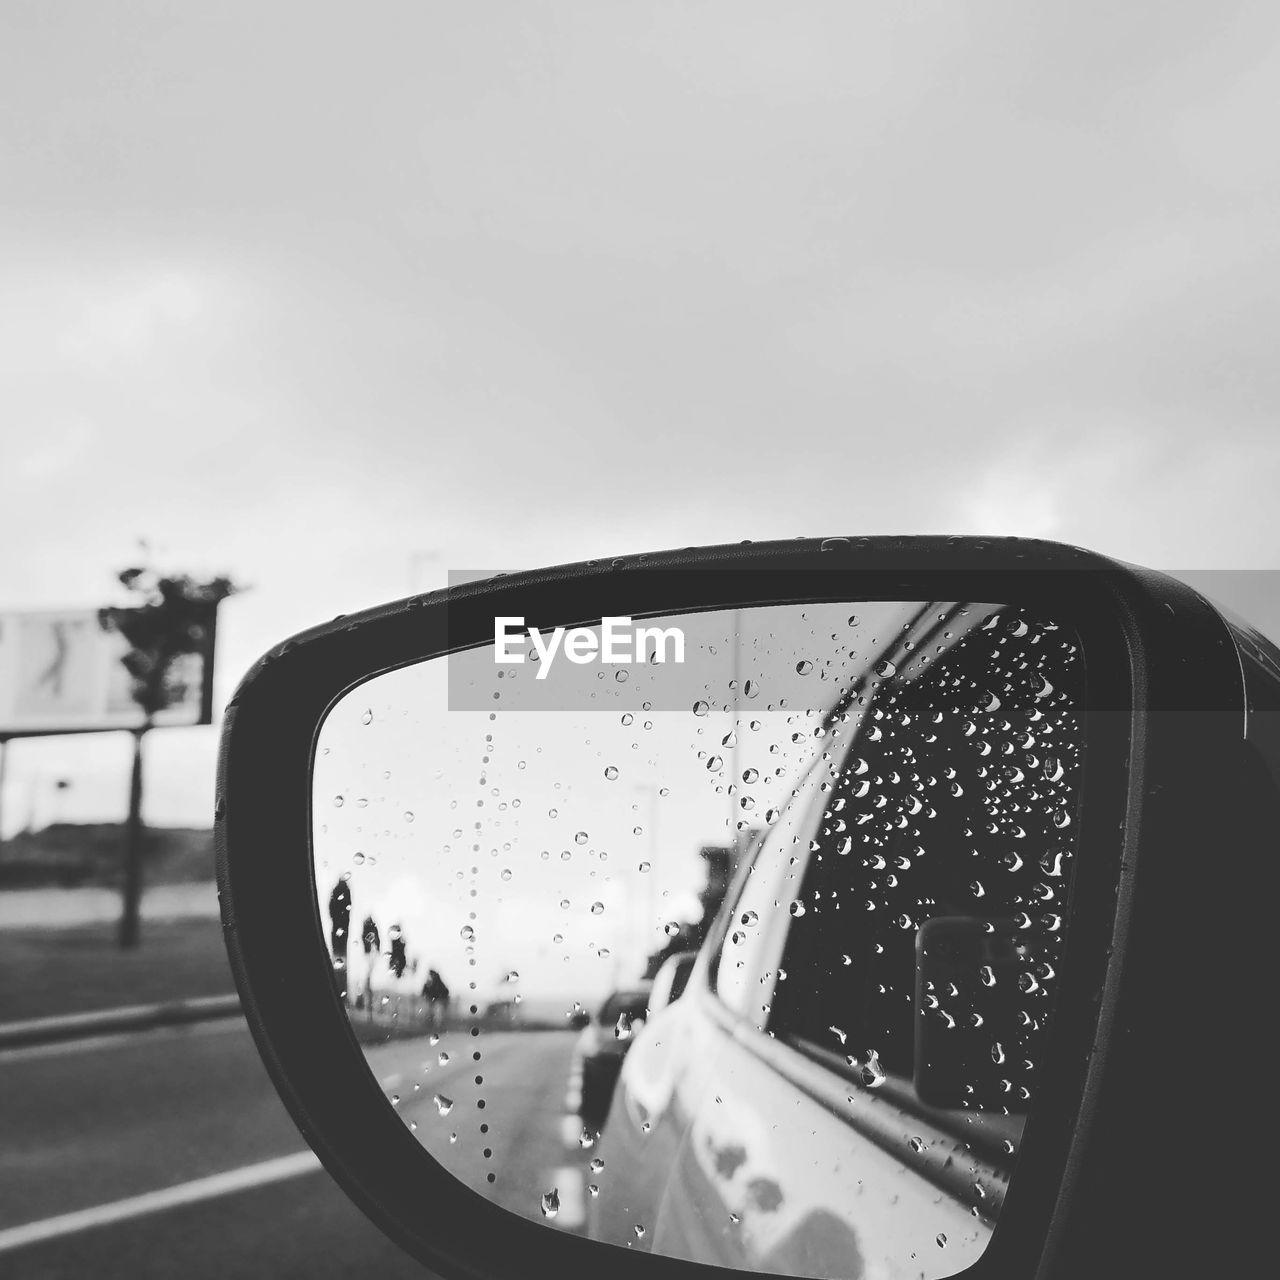 CLOSE-UP OF RAINDROPS ON SIDE-VIEW MIRROR